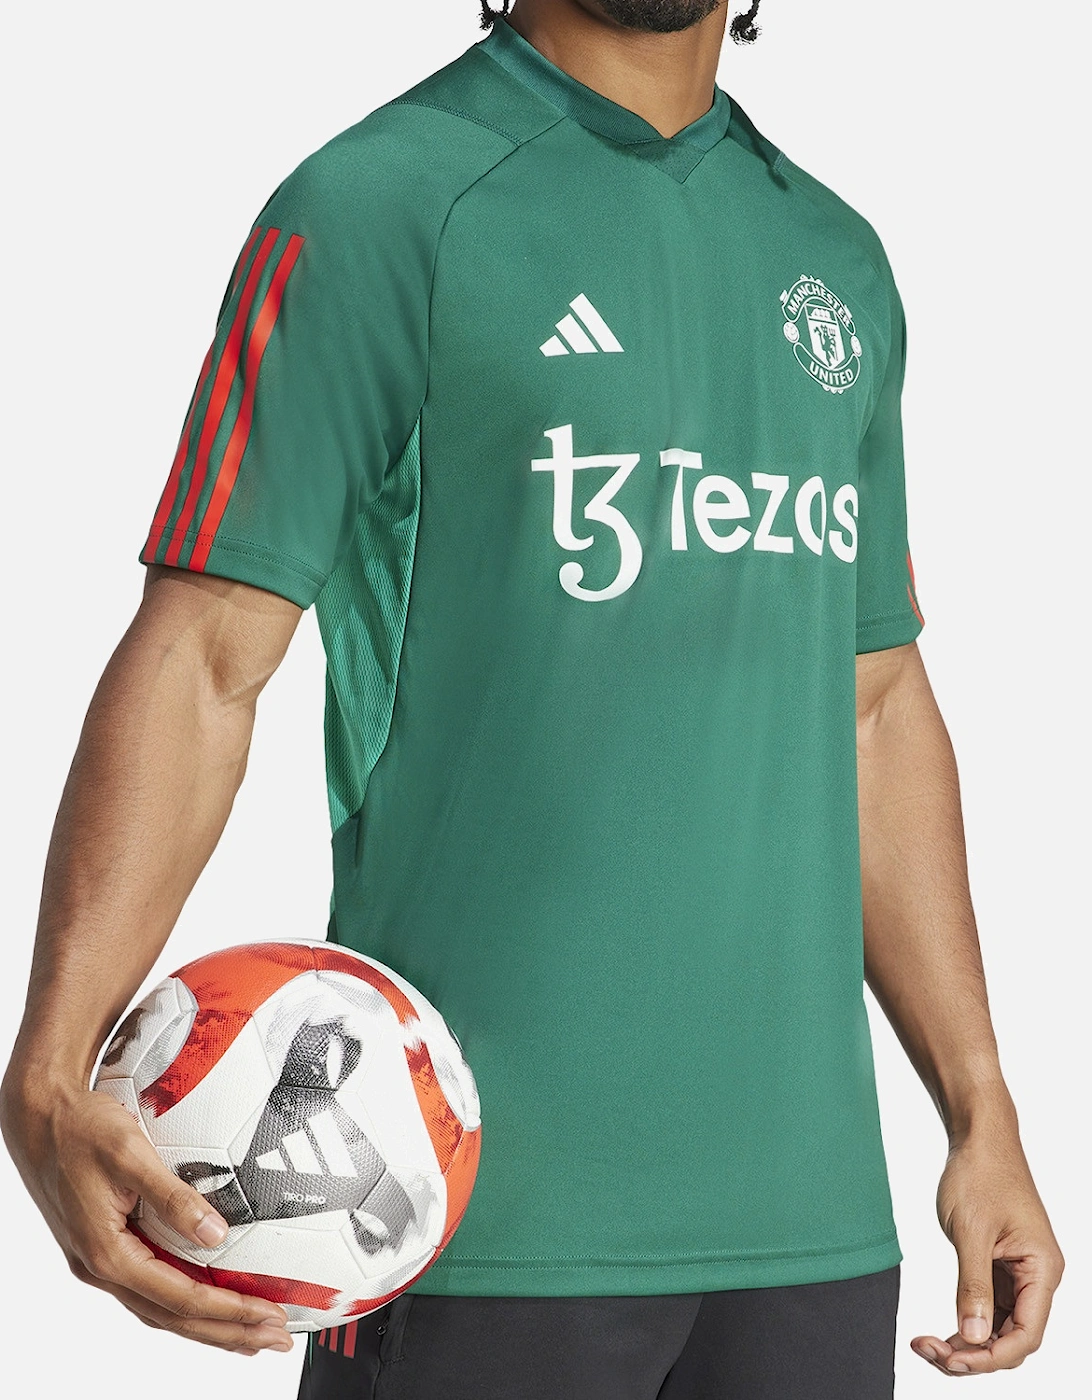 Mens Manchester United Training Jersey (Green)